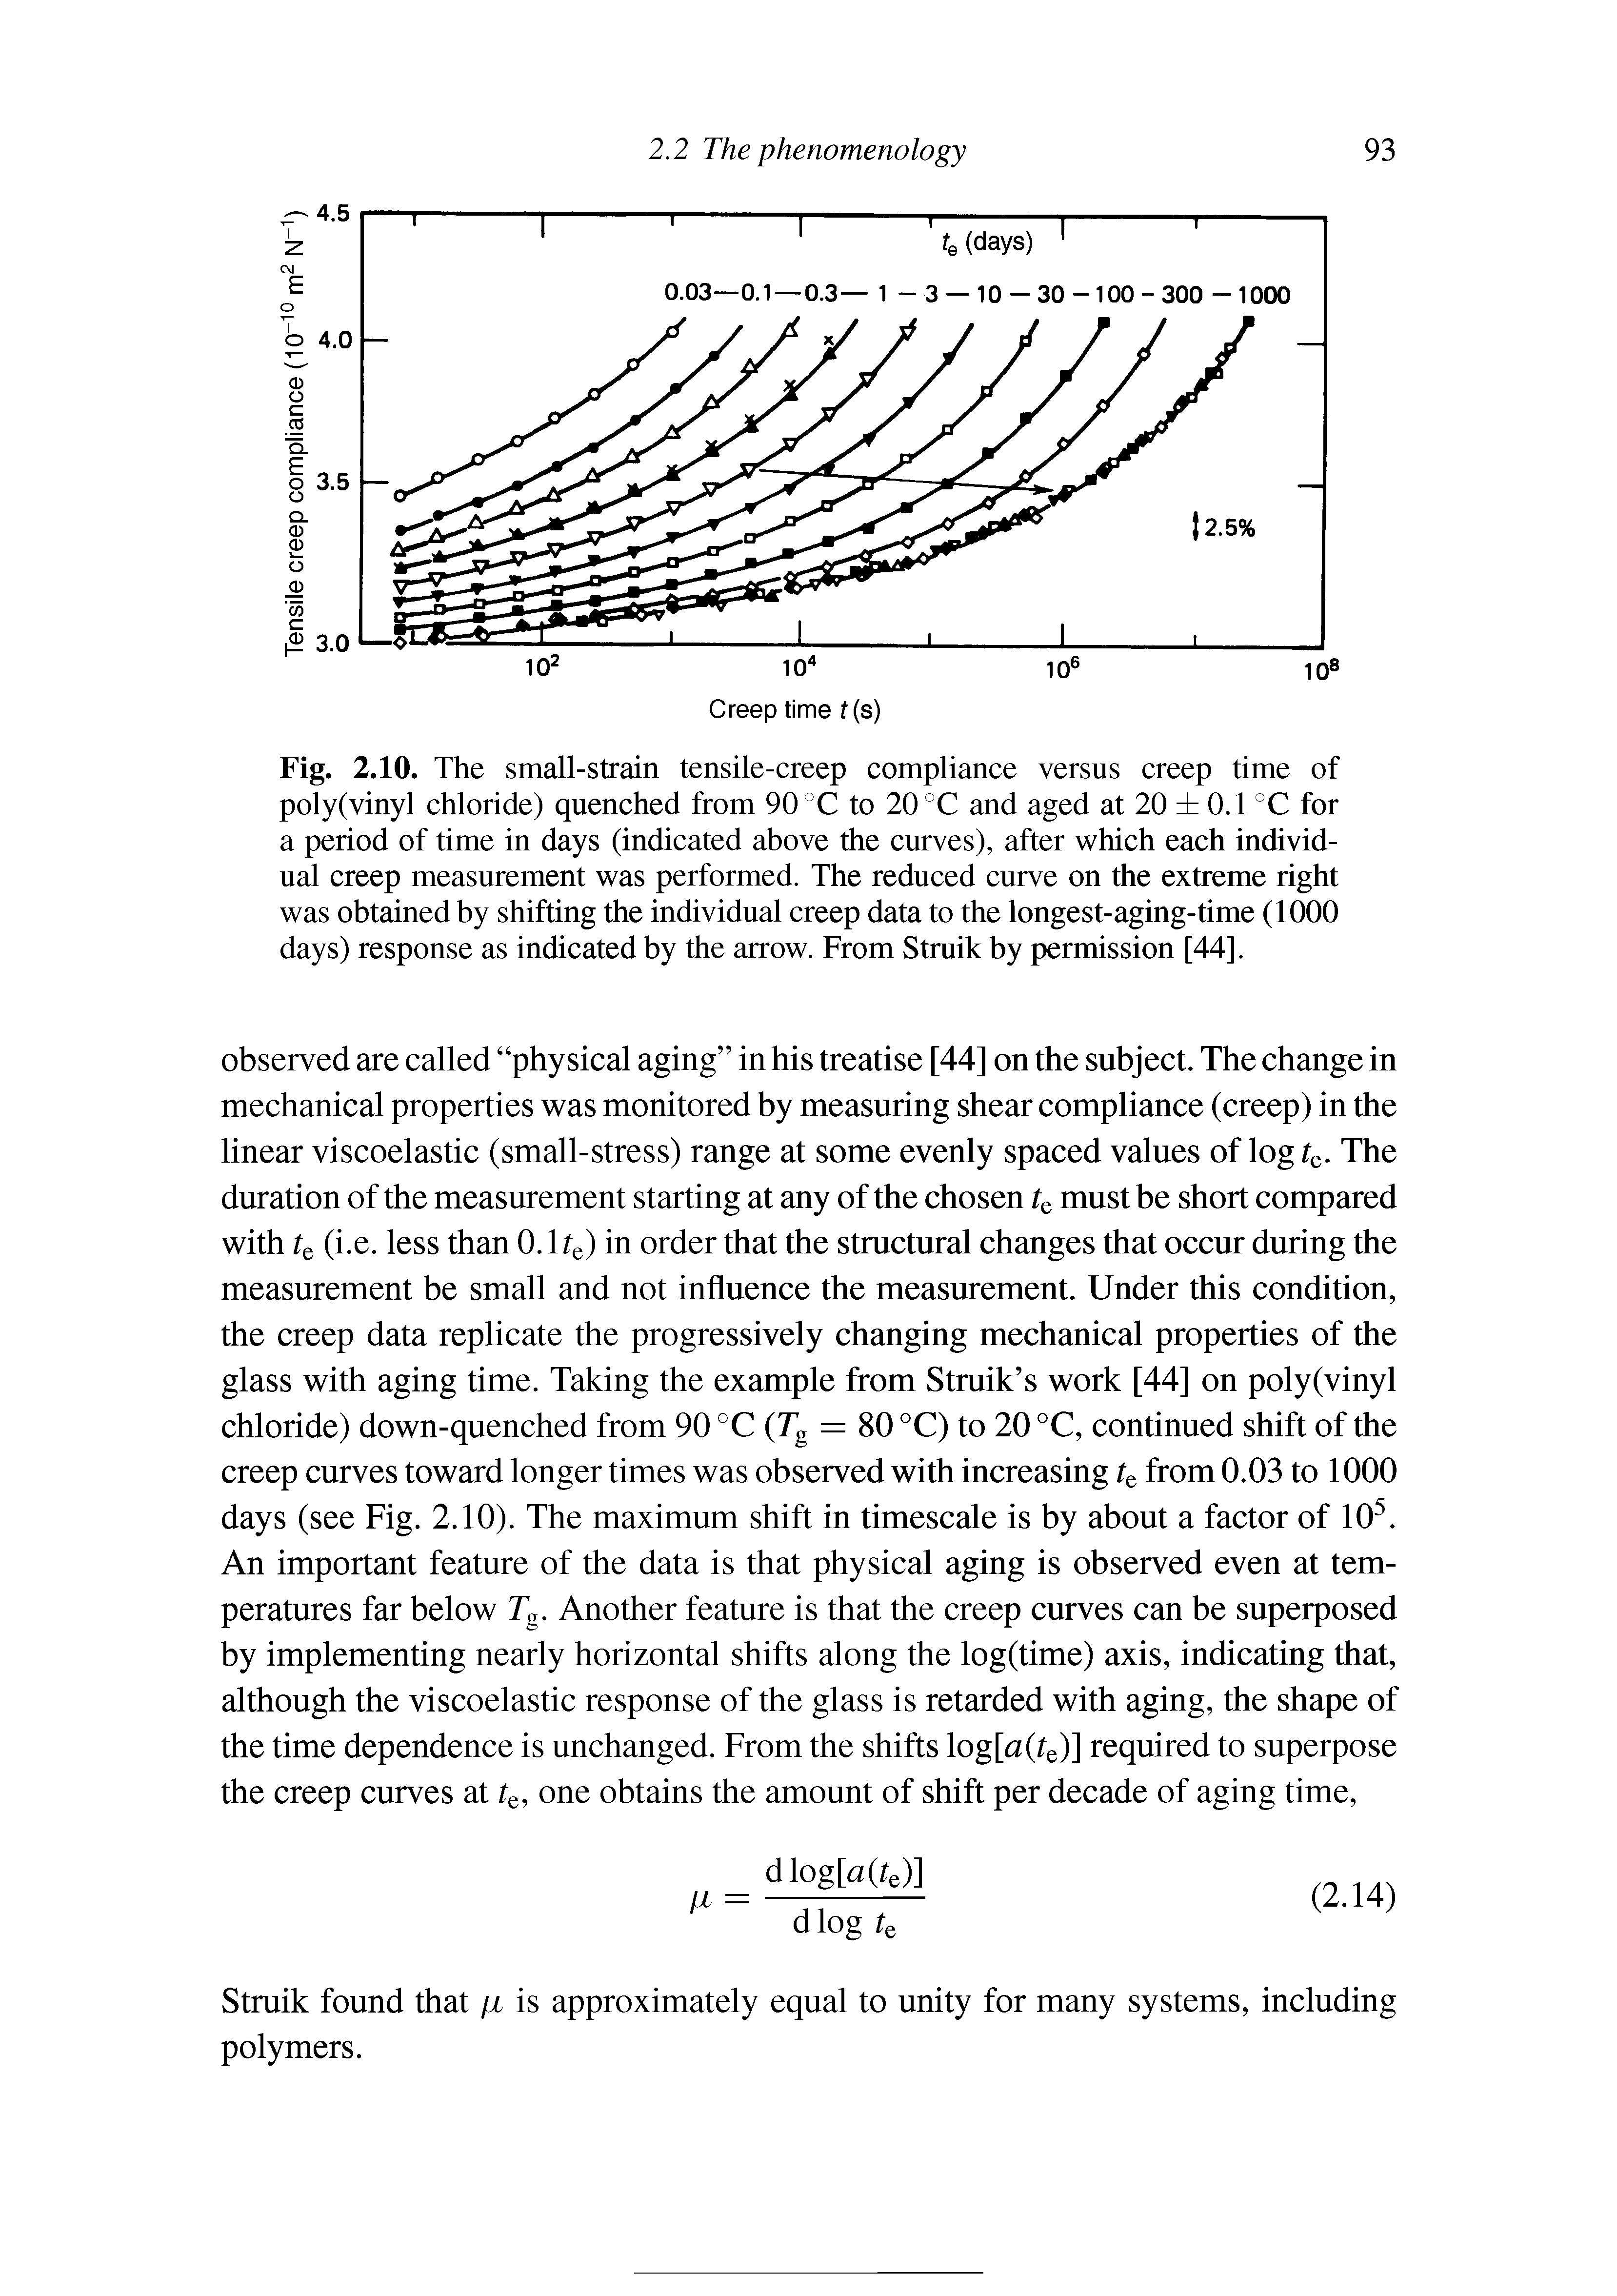 Fig. 2.10. The small-strain tensile-creep compliance versus creep time of poly(vinyl chloride) quenched from 90 °C to 20 °C and aged at 20 dz 0.1 °C for a period of time in days (indicated above the curves), after which each individual creep measurement was performed. The reduced curve on the extreme right was obtained by shifting the individual creep data to the longest-aging-time (1000 days) response as indicated by the arrow. From Struik by permission [44].